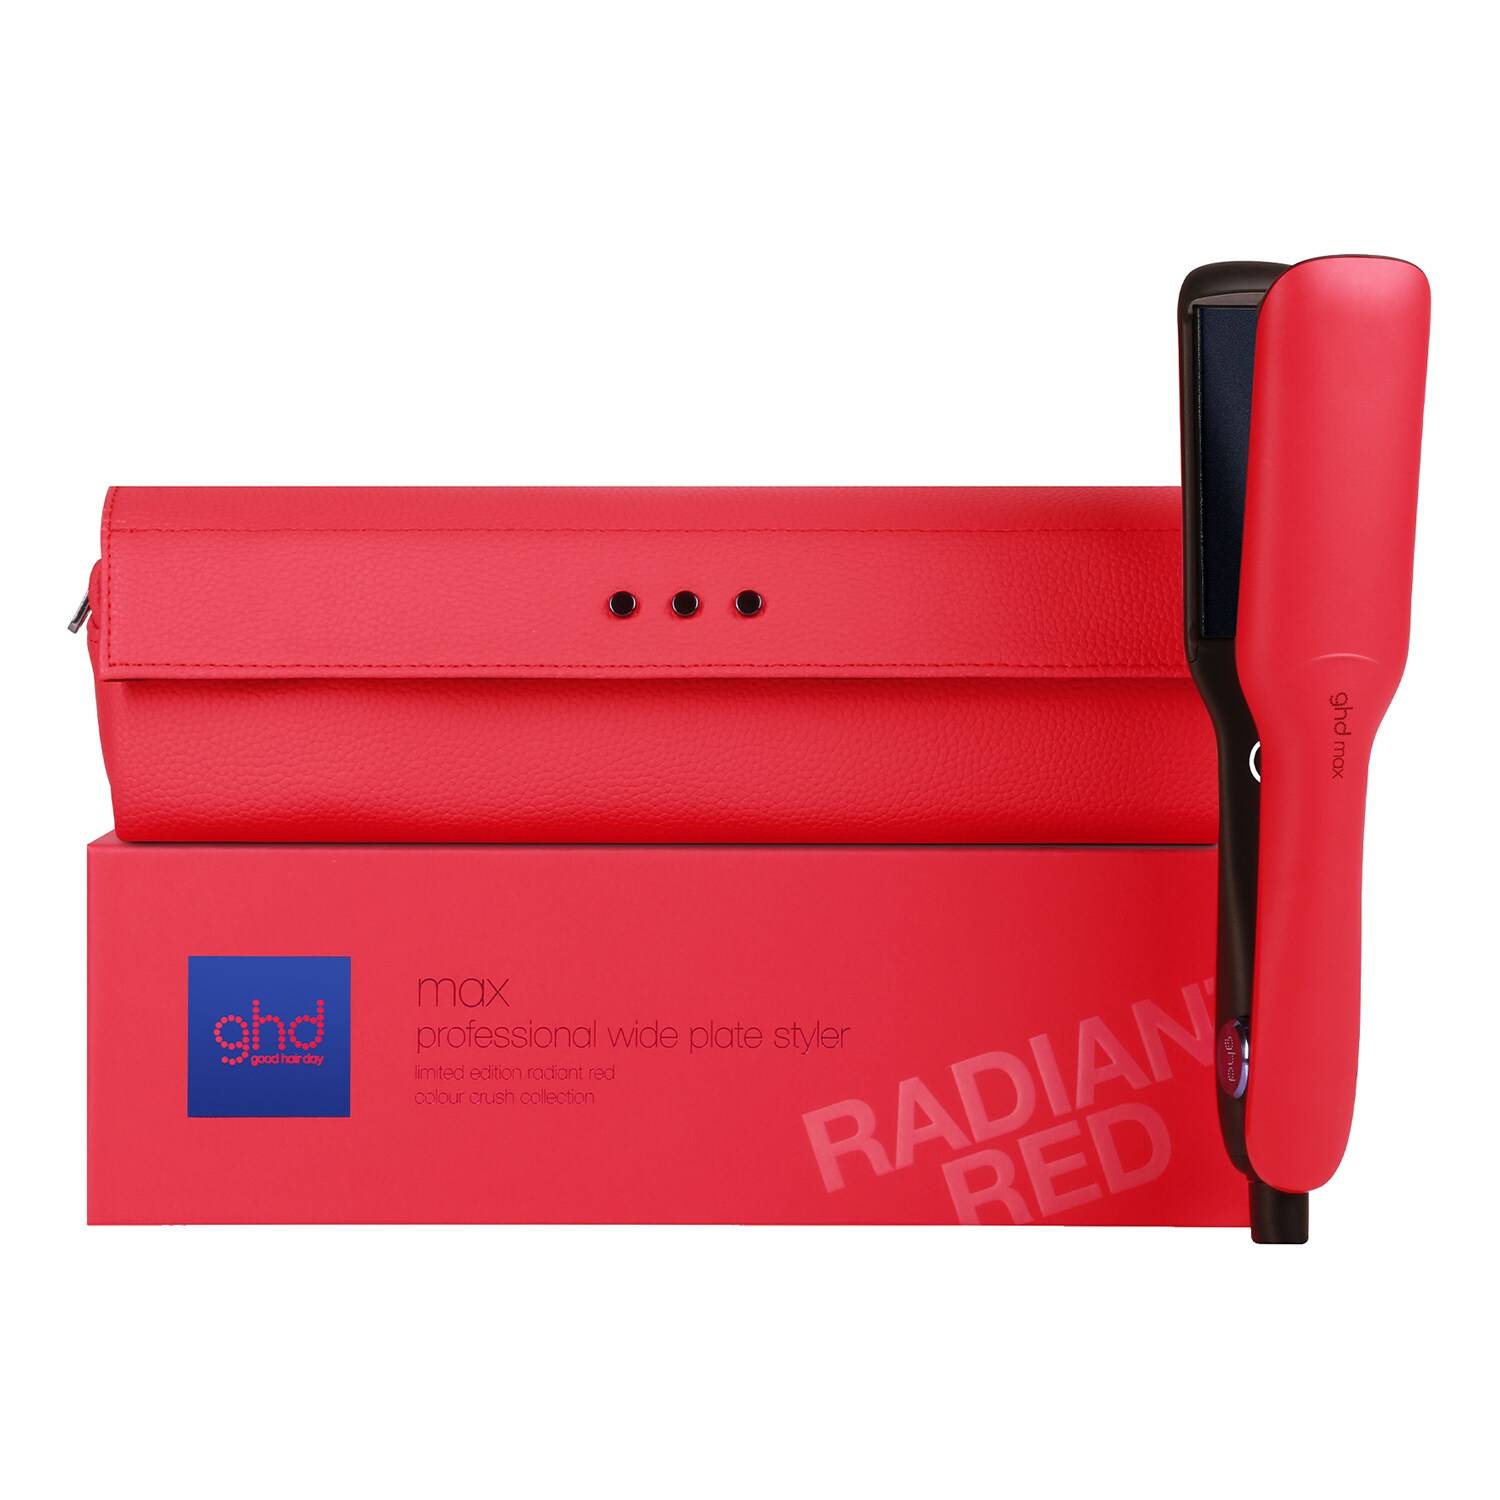 Ghd Max Professional Wide Plate Hair Styler In Radiant Red - Limited Edition